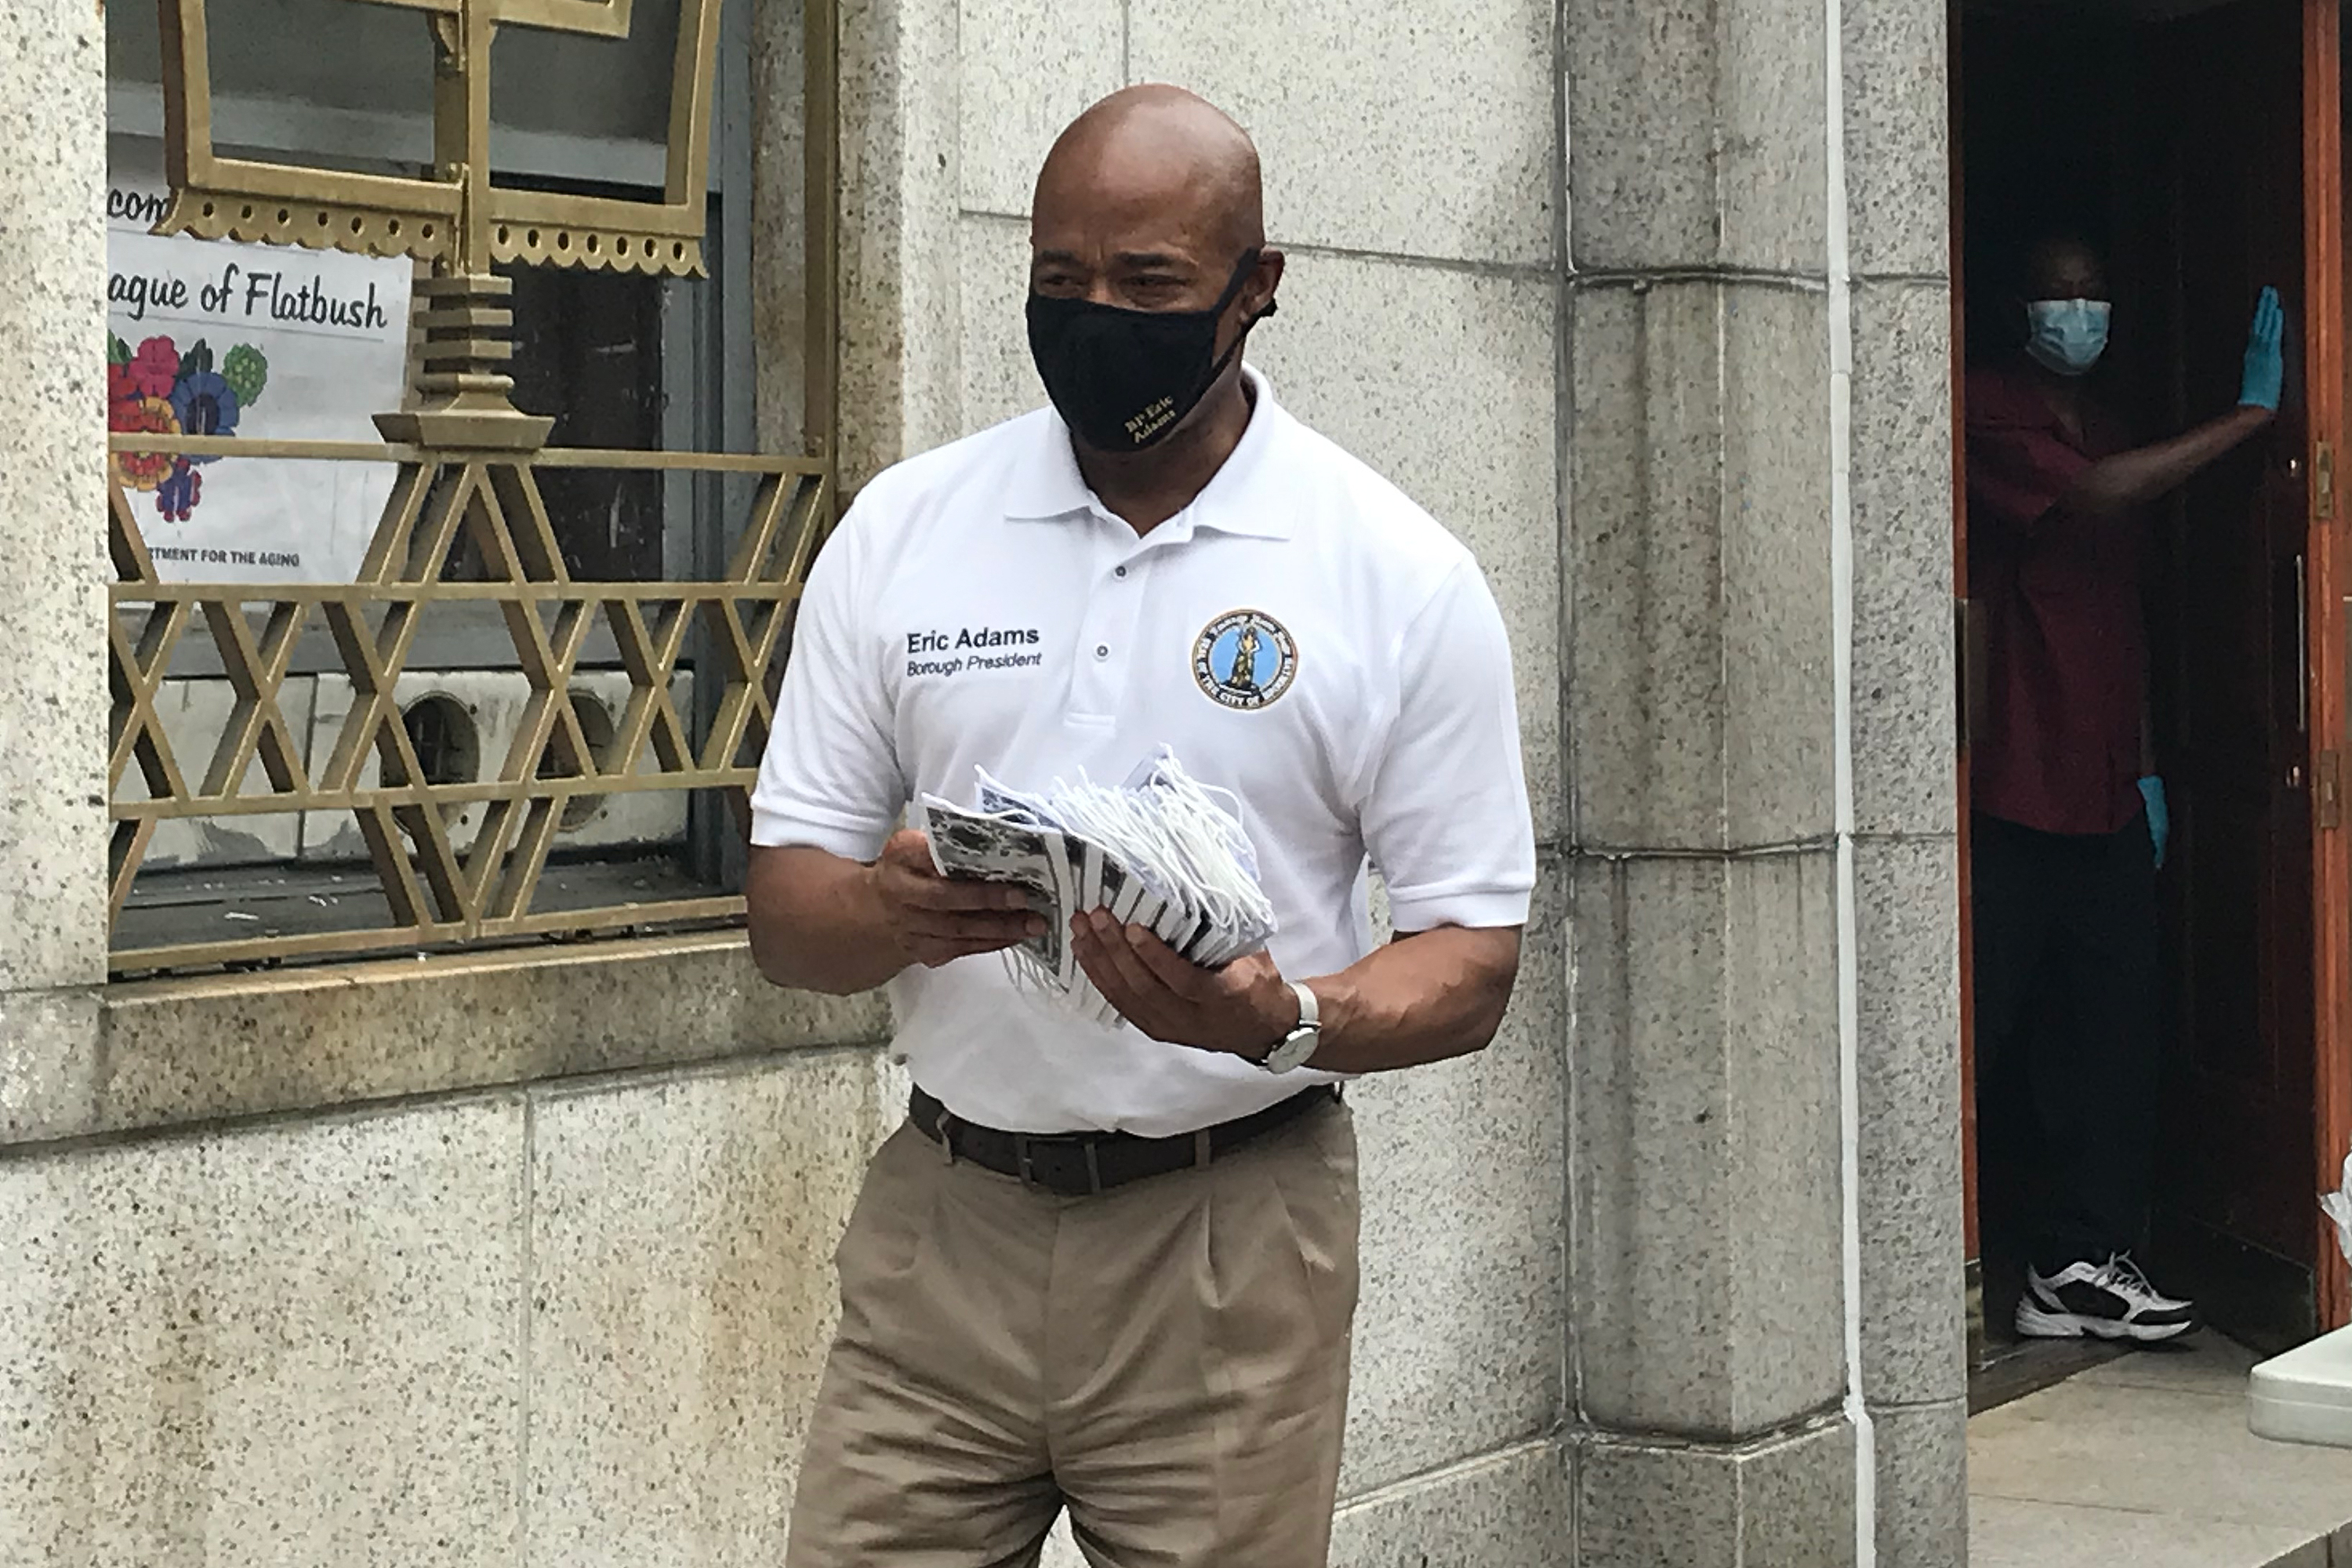 Brooklyn Borough President Eric Adams hands out masks at the East Midwood Jewish Center, June 5.